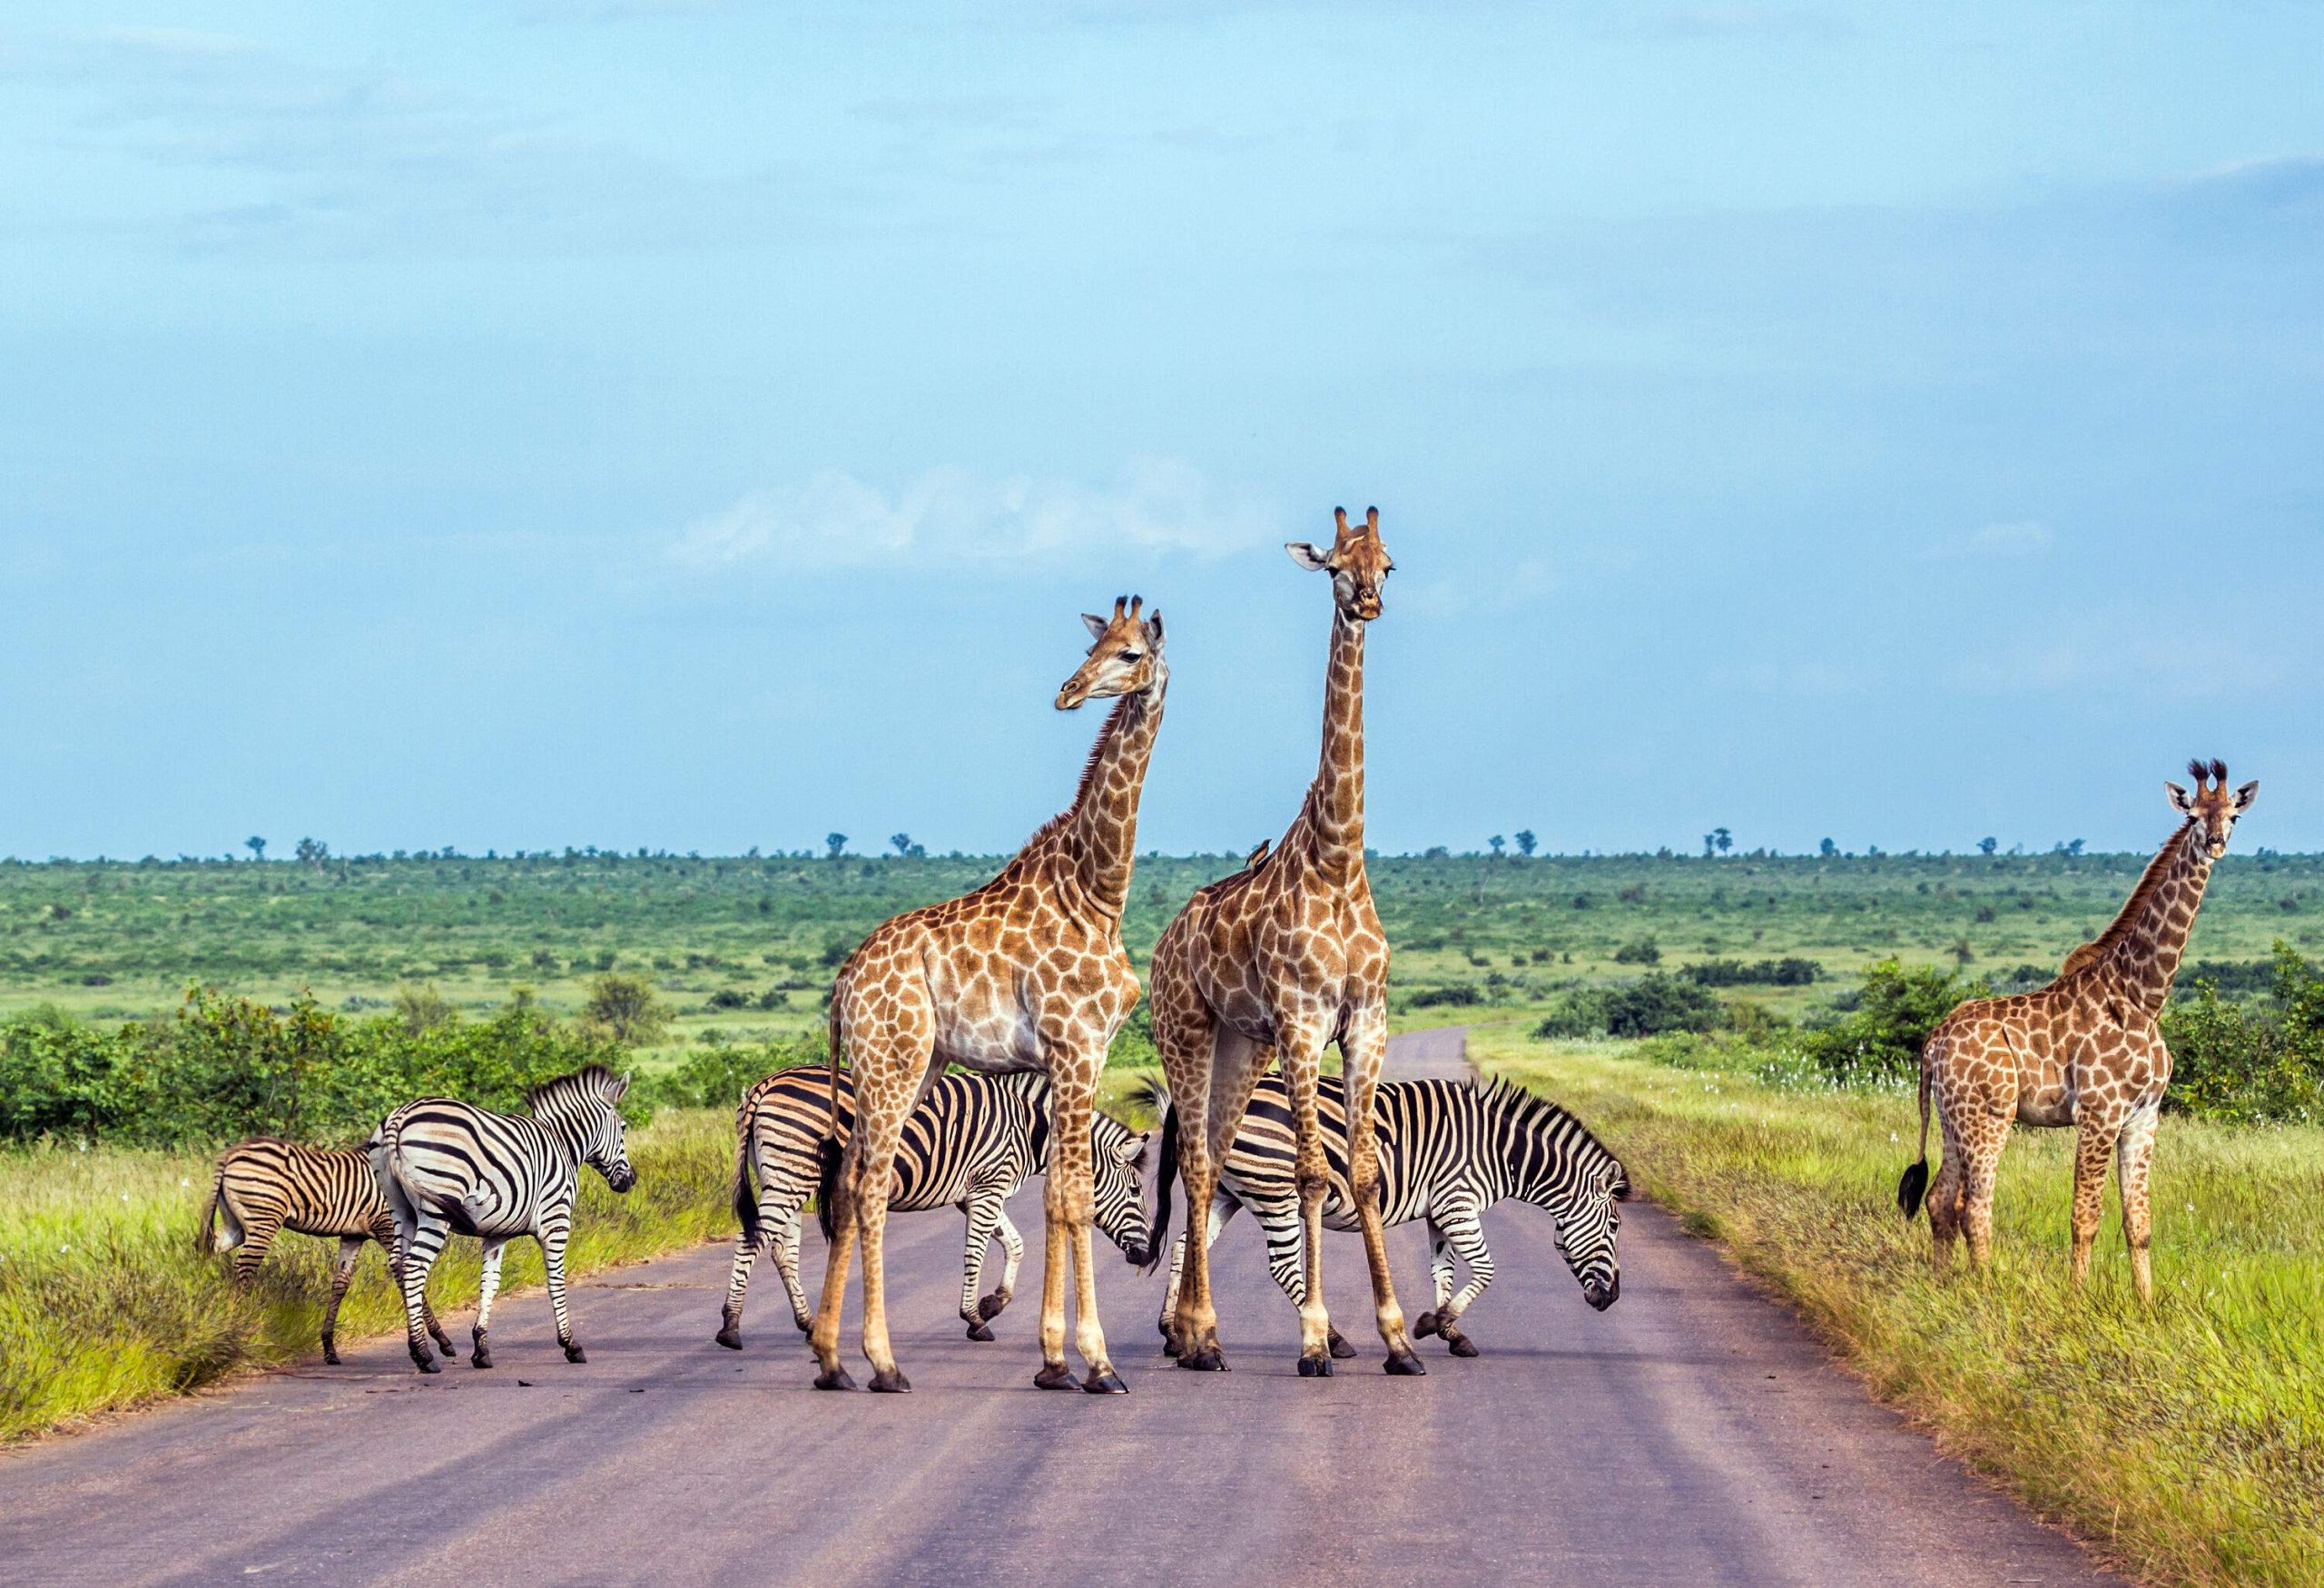 Giraffes and zebras crossing the road on the vast plains.